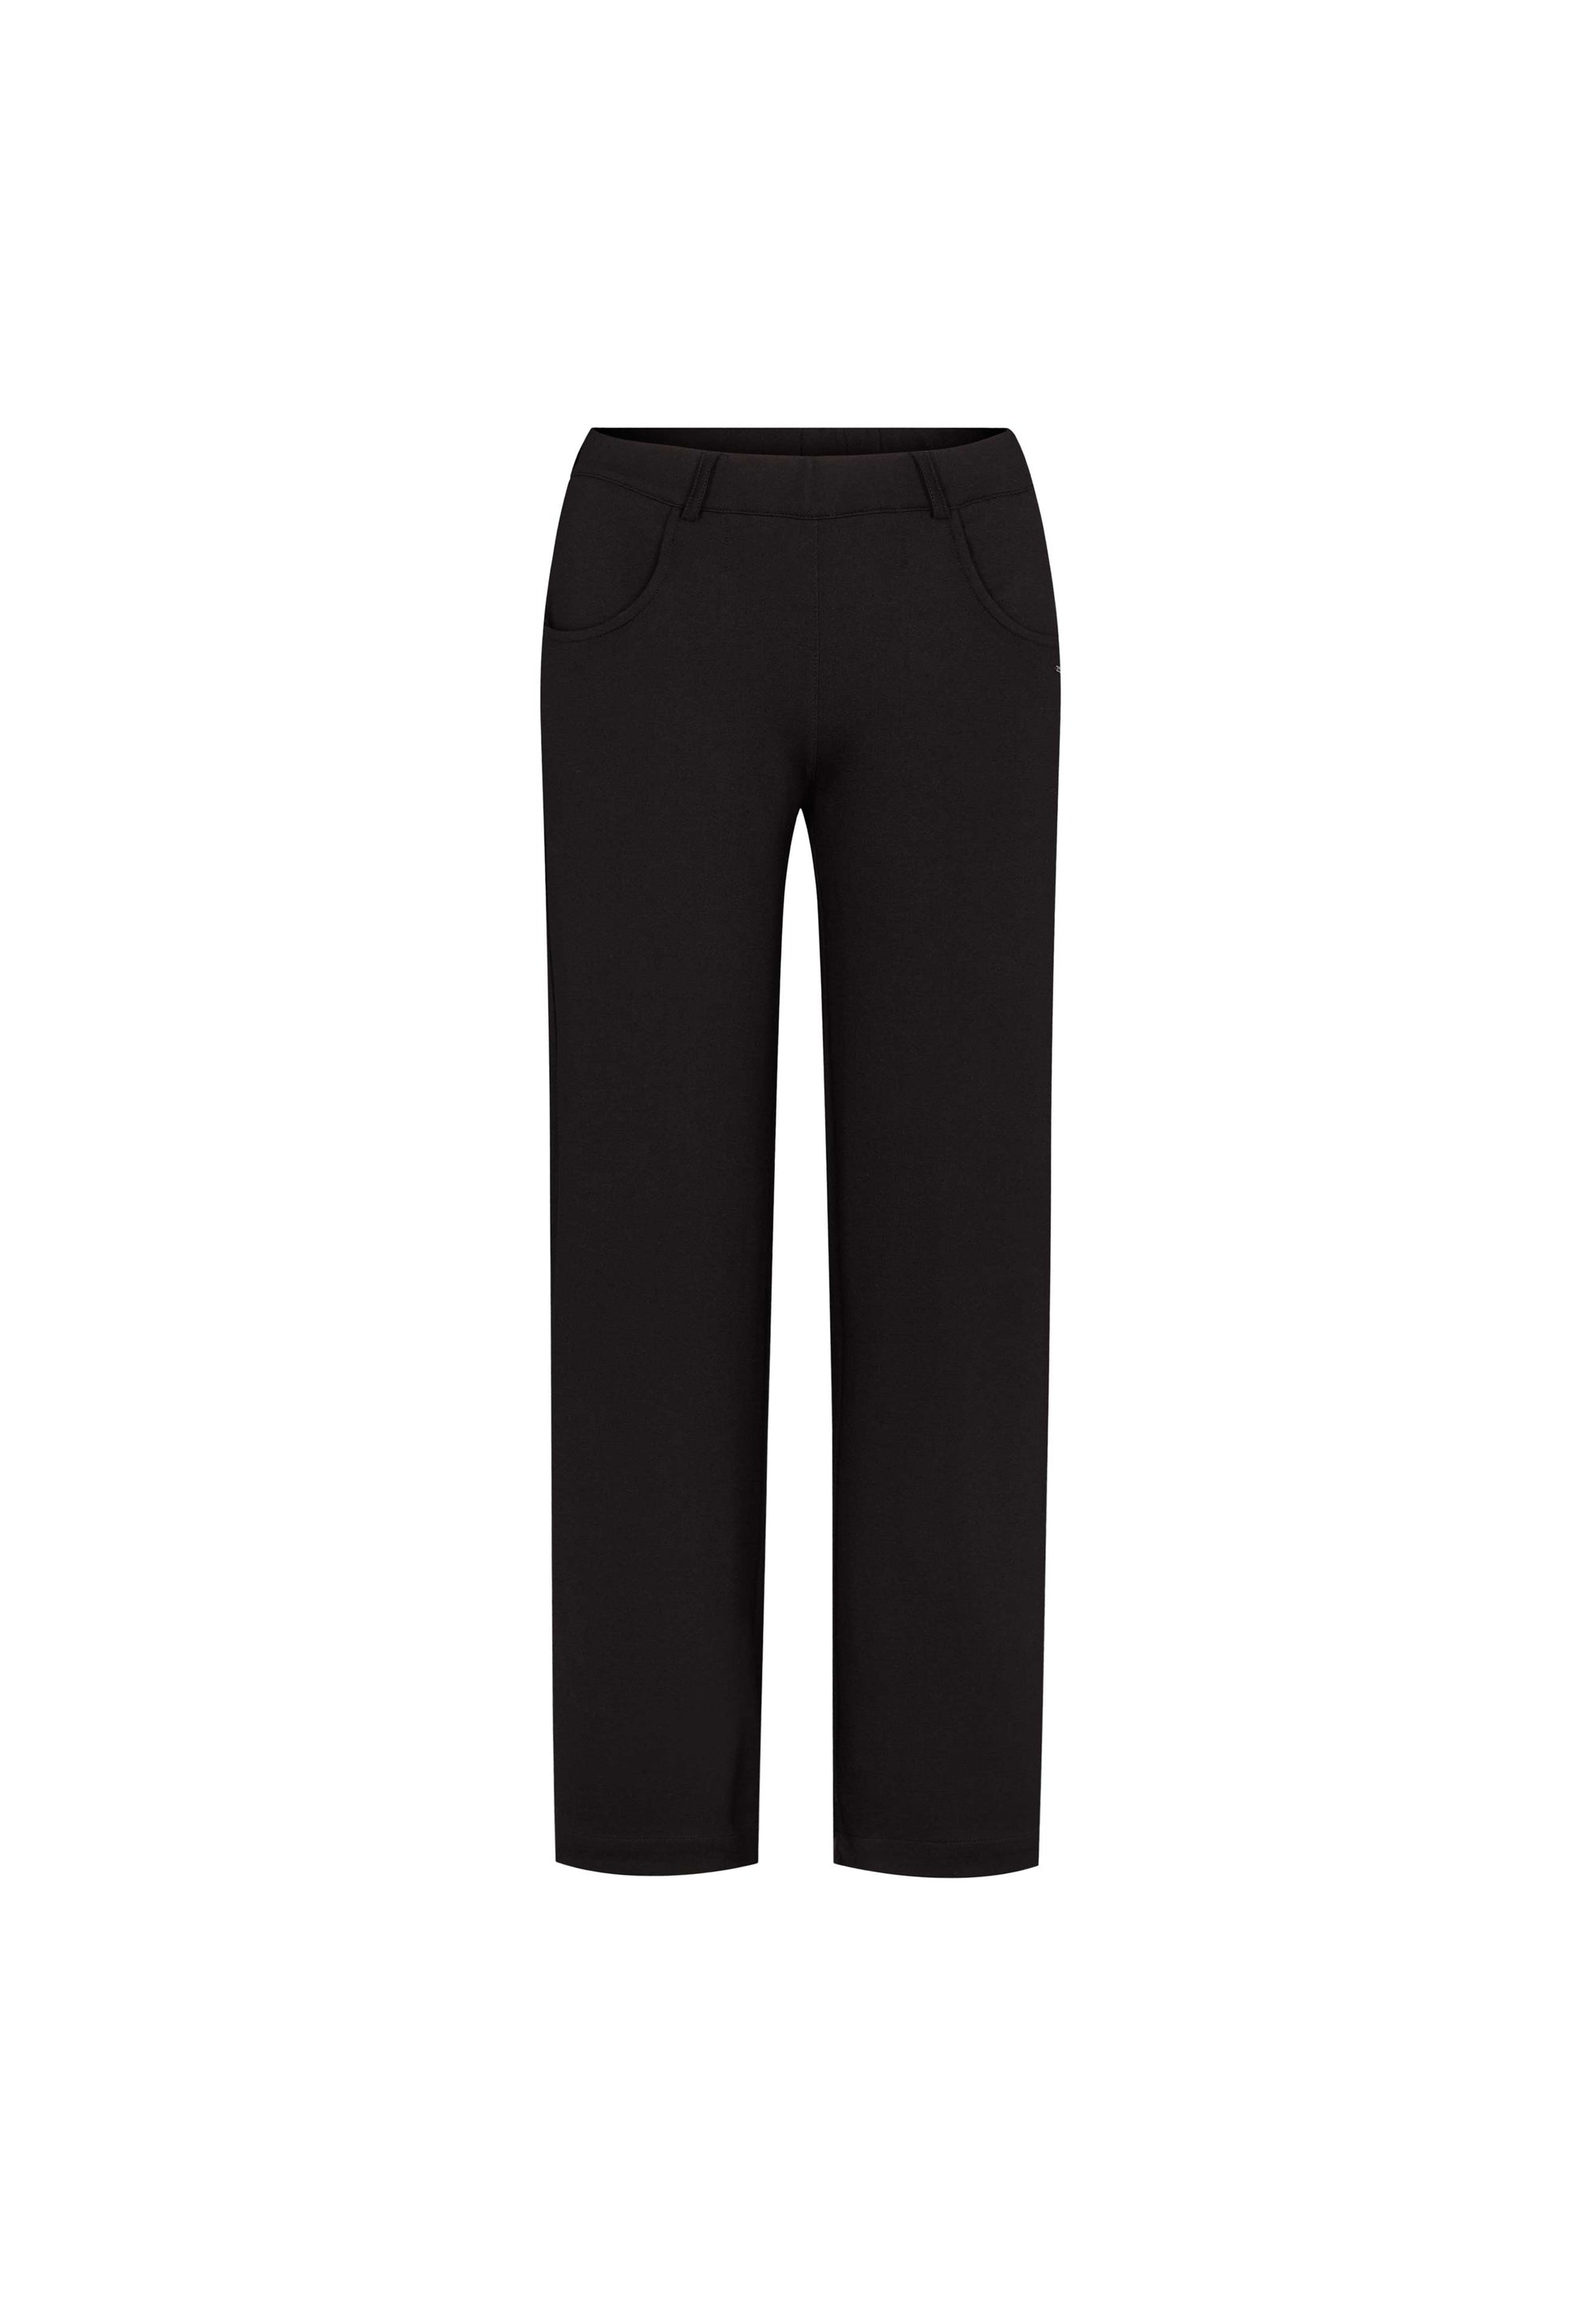 LAURIE Donna Loose - Medium Length Trousers LOOSE 99147 Black